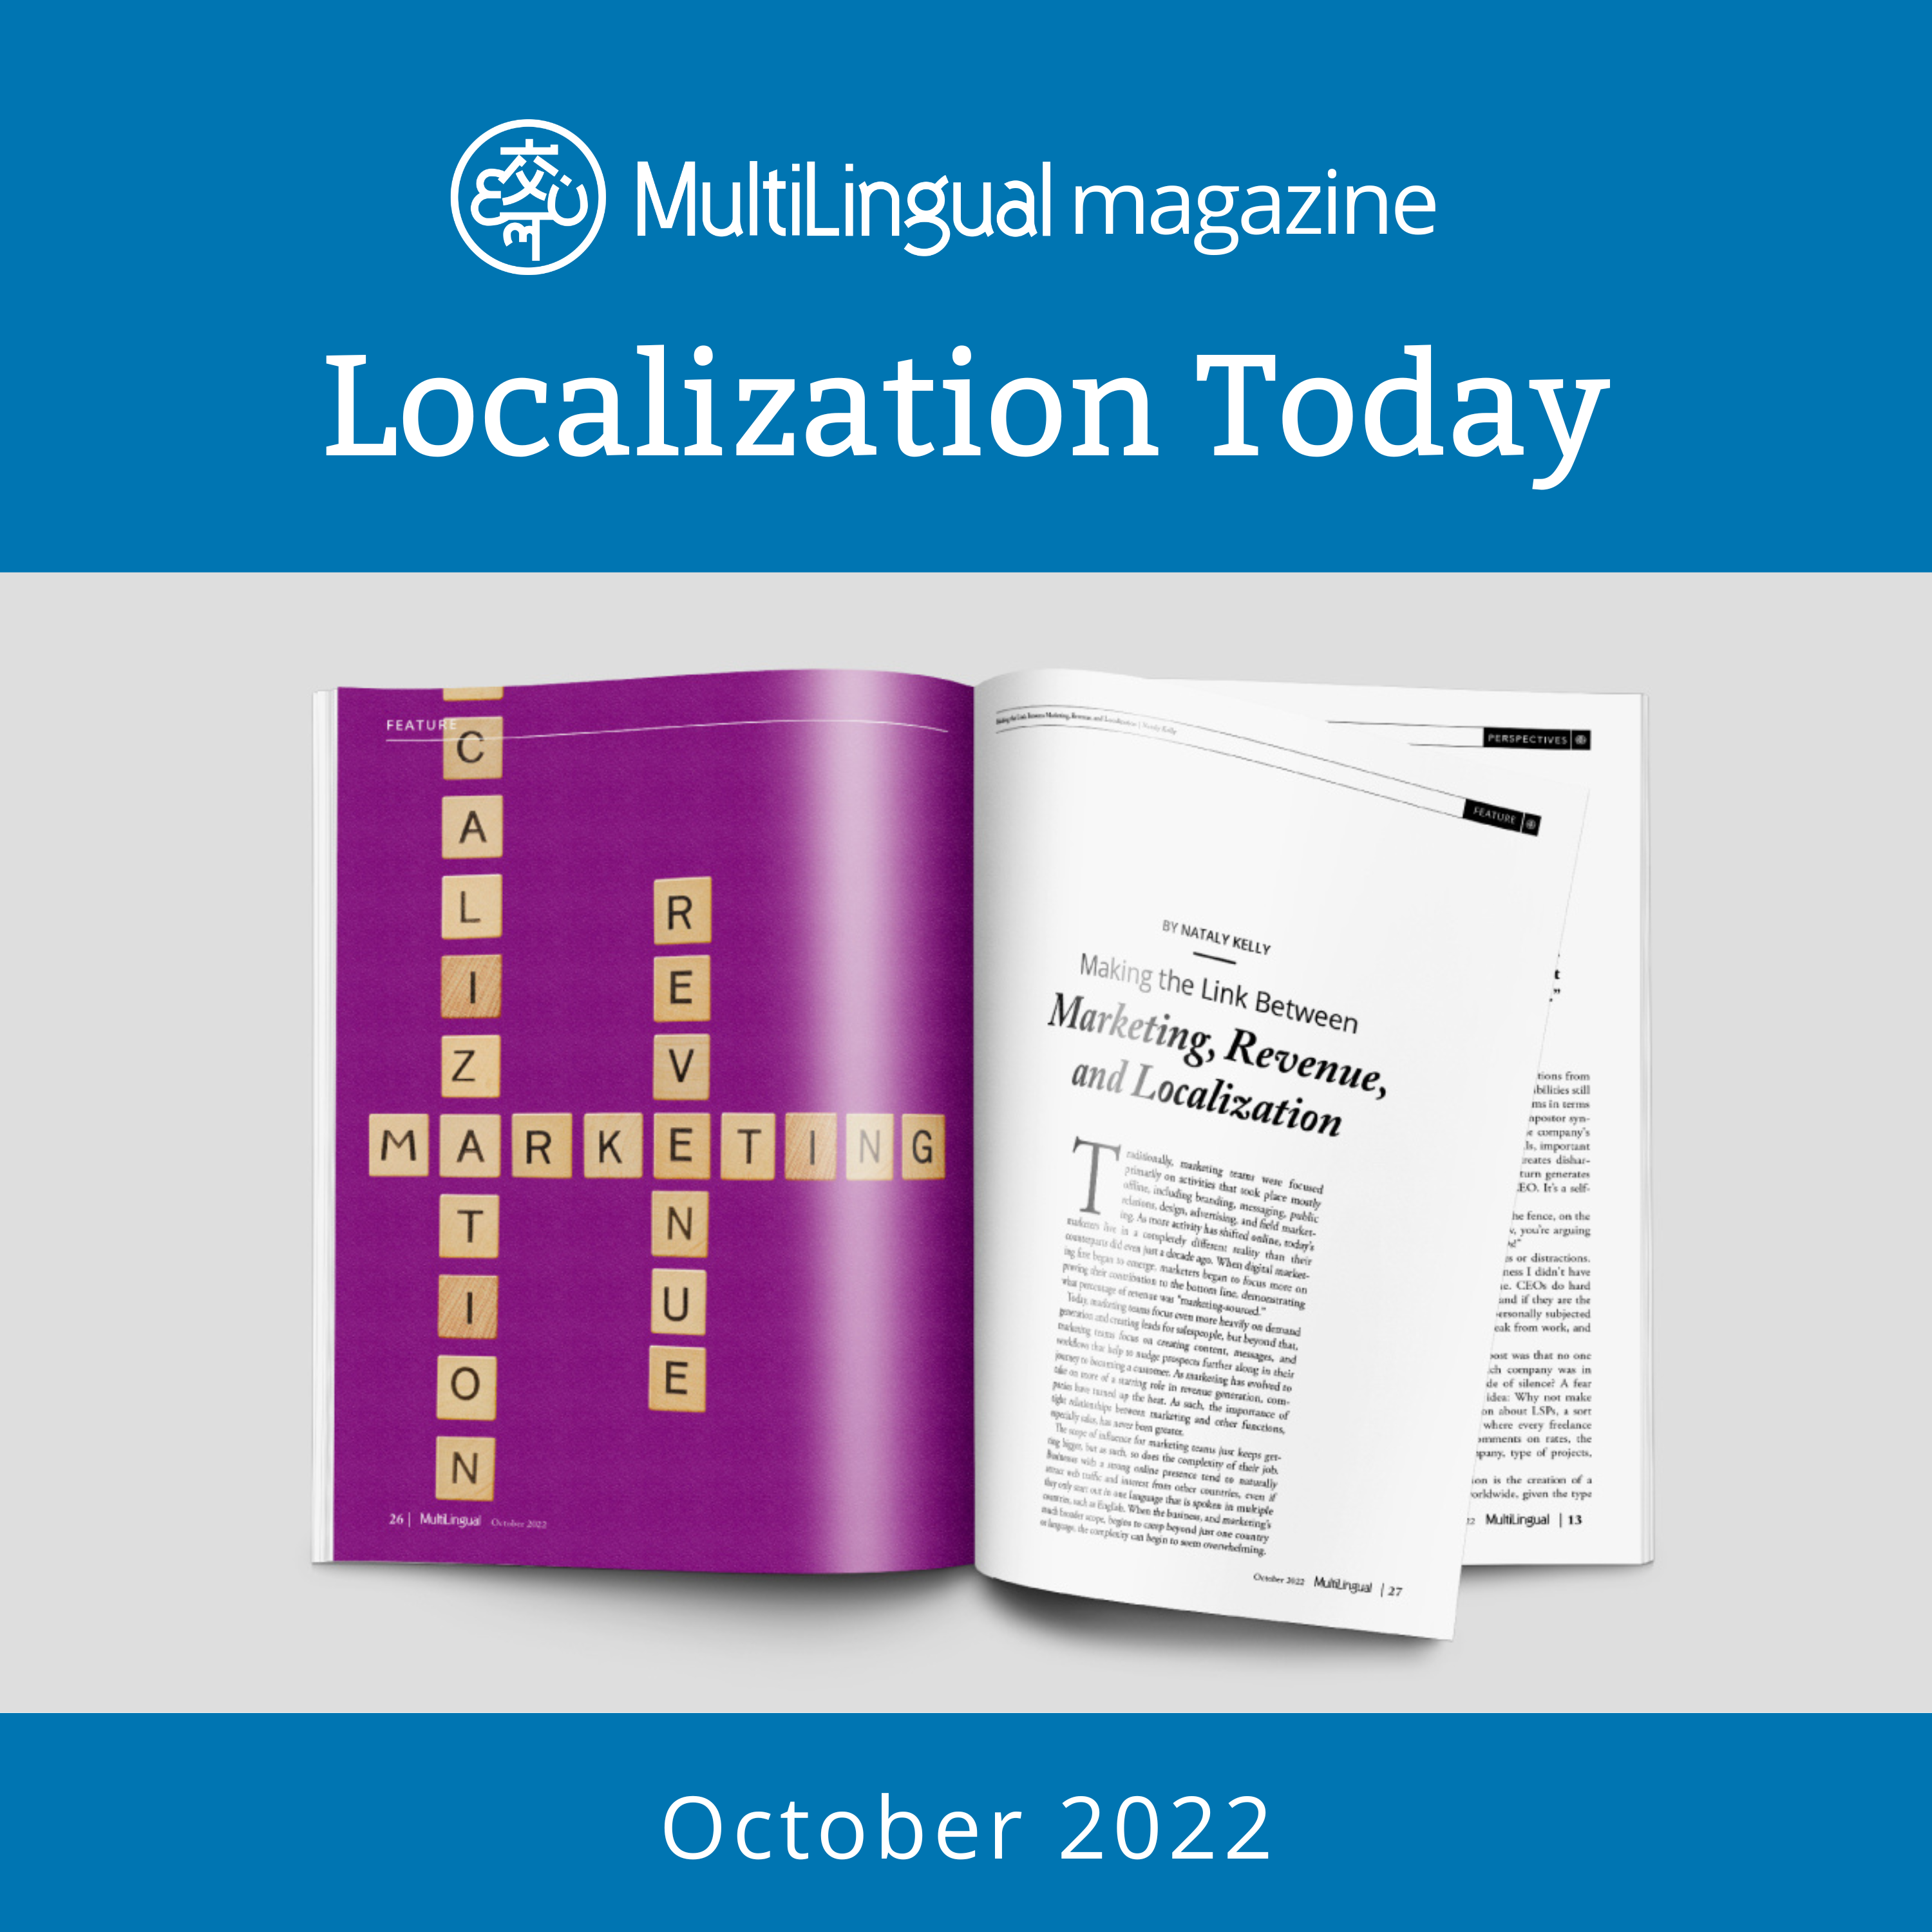 Making the Link Between Marketing, Revenue, and Localization | By Nataly Kelly | October 2022